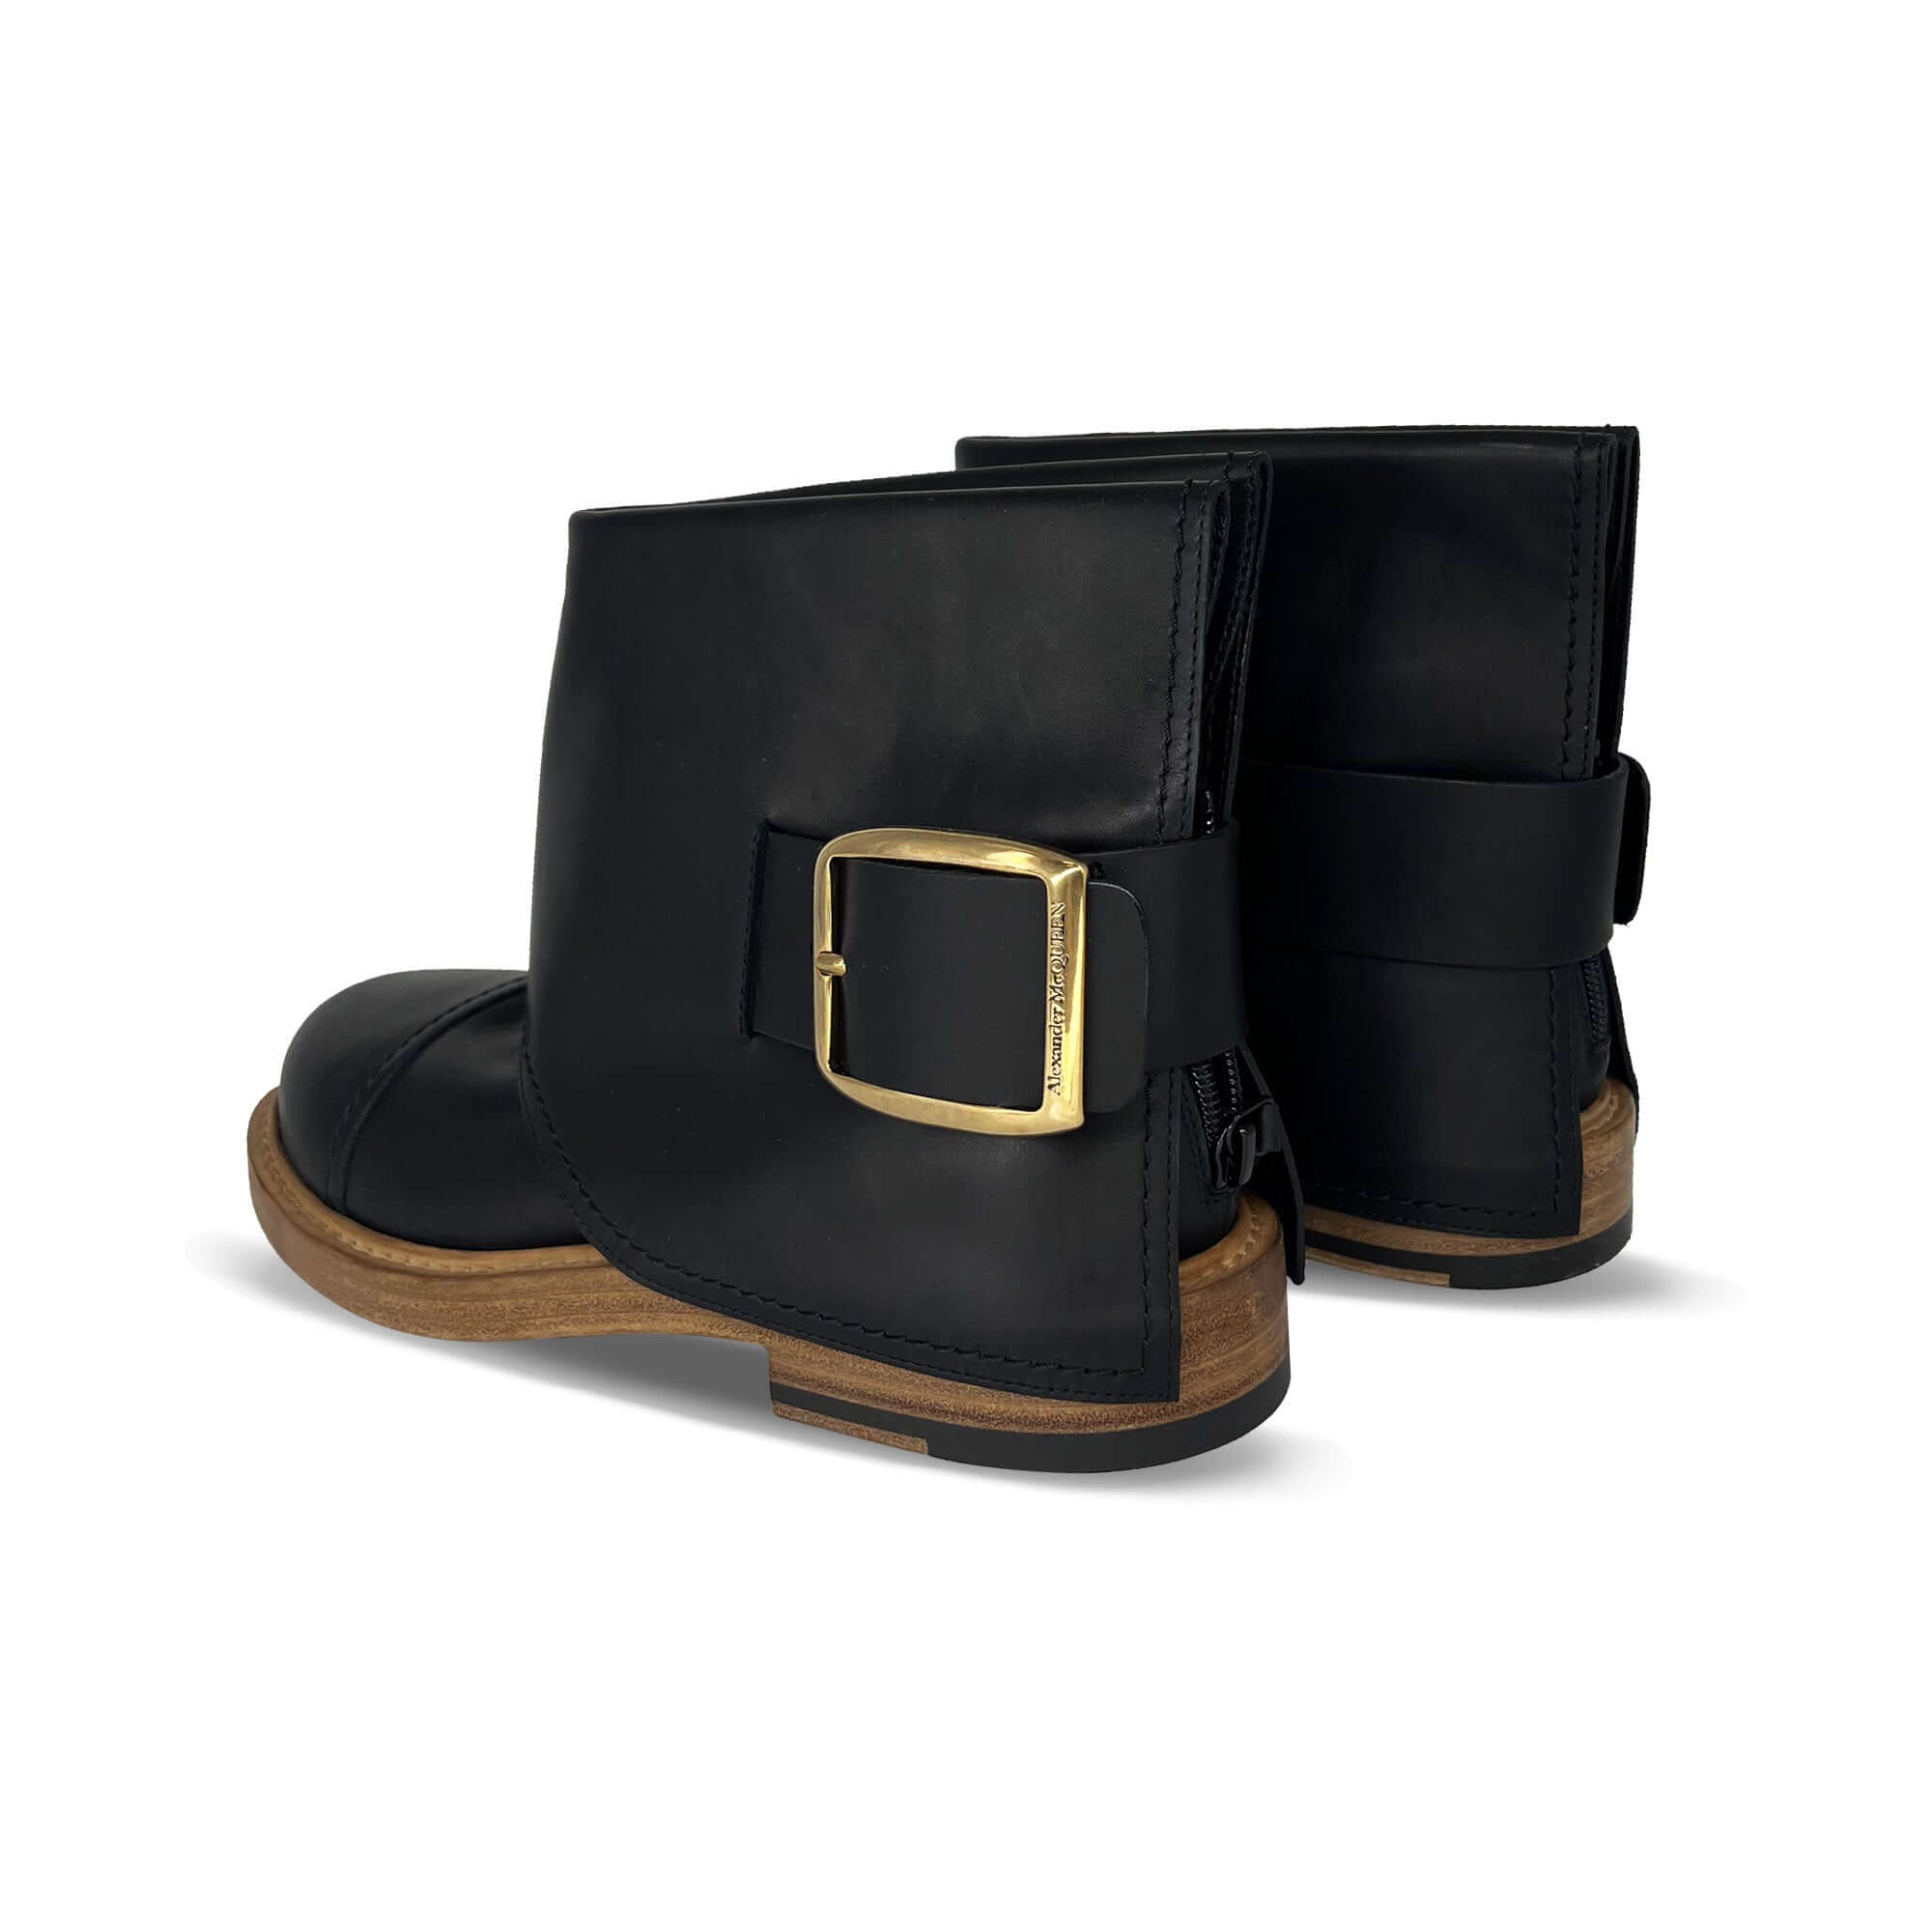 Alexander McQueen gold buckled leather ankle boots